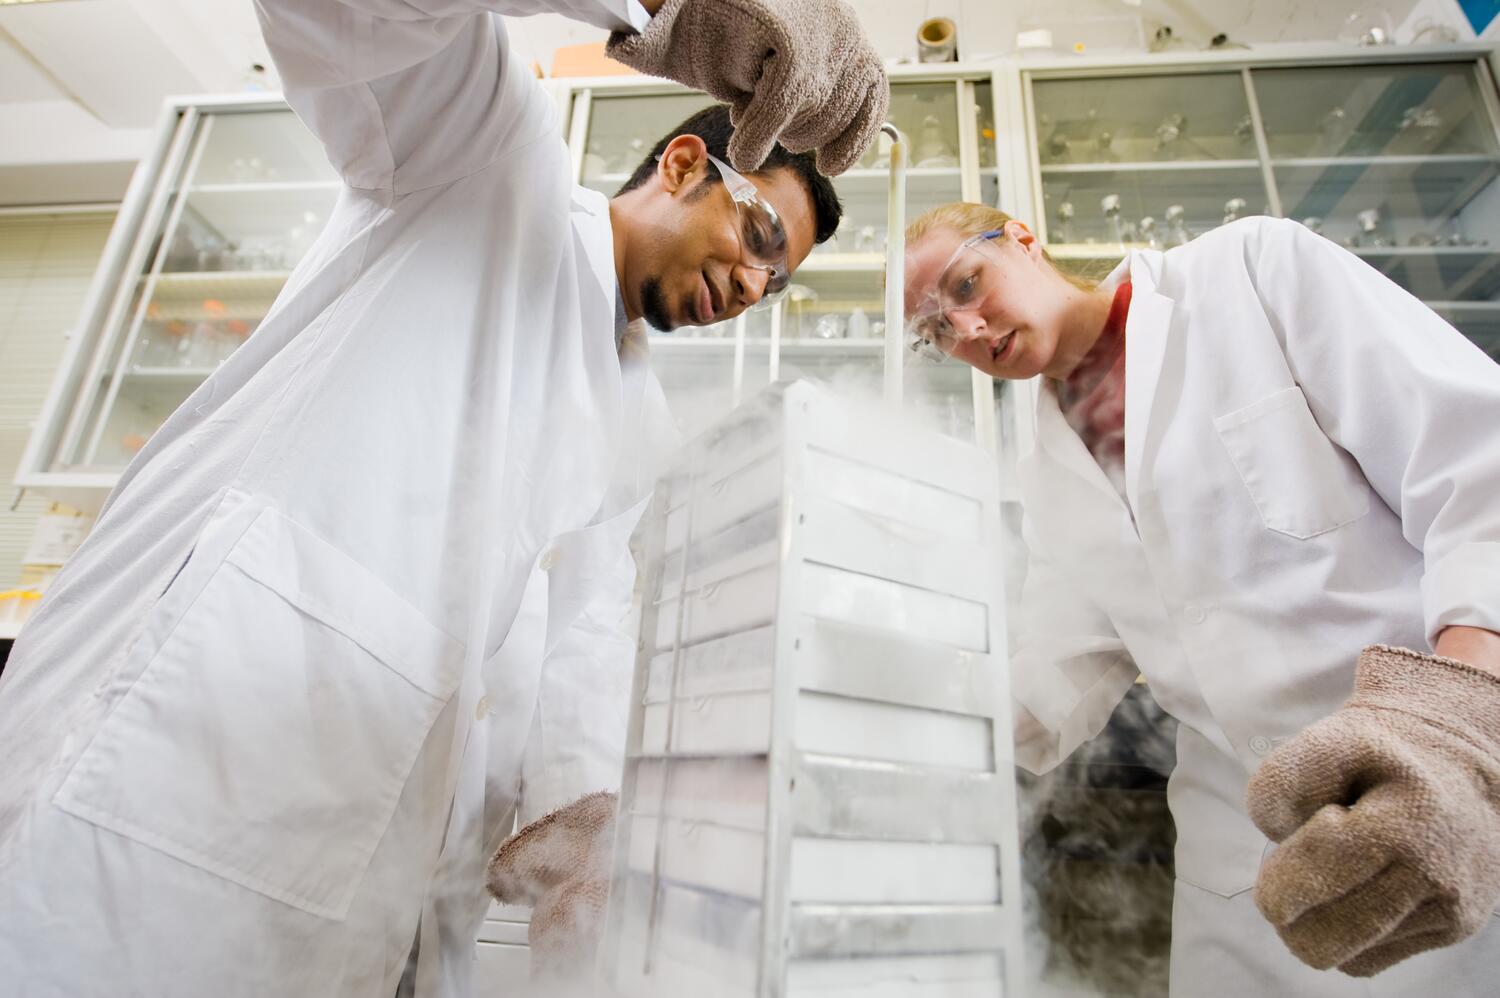 Two chemistry students in white lab coats work in a lab looking over stacked trays.